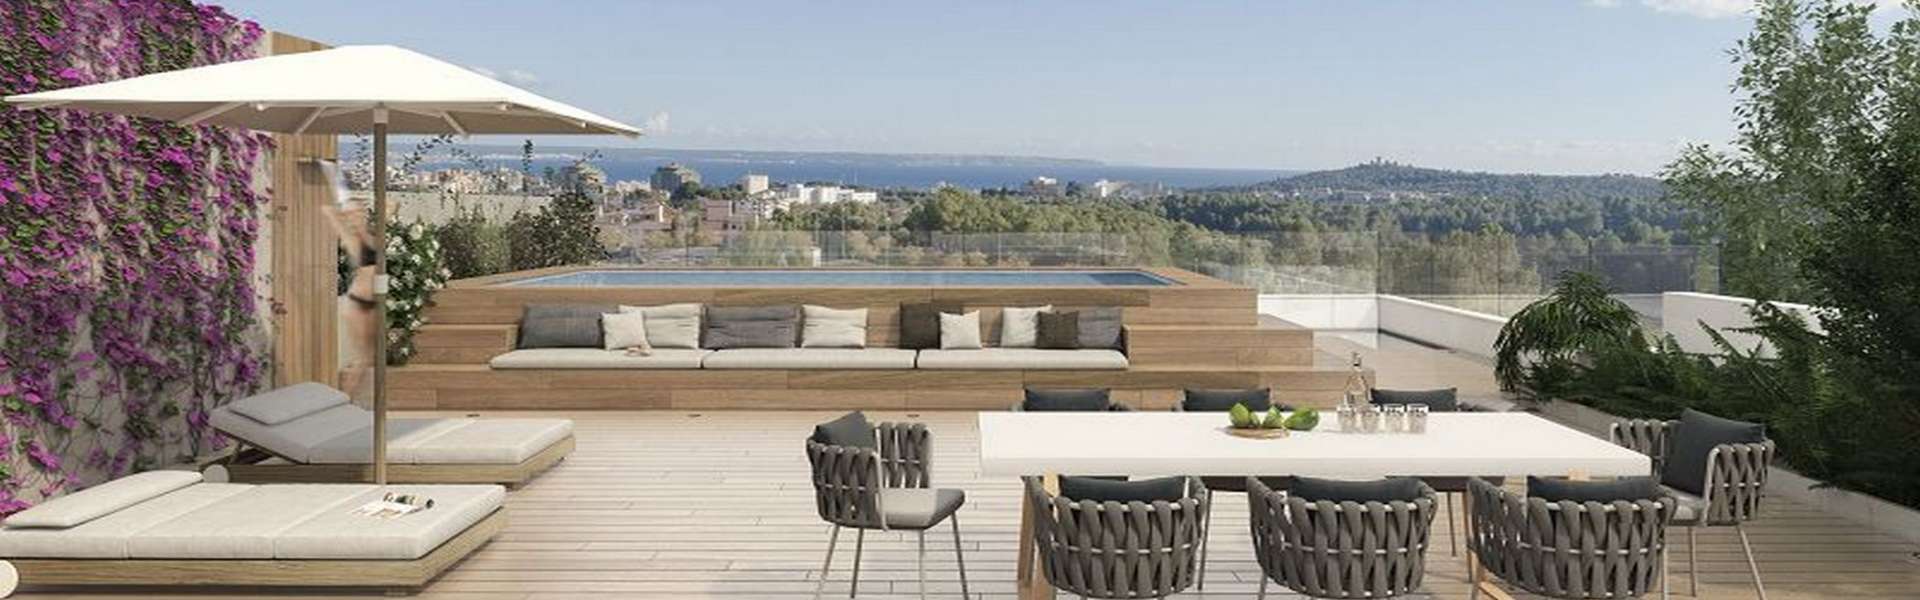 Palma/Golf Course Son Quint - Apartments/Penthouses in dream location